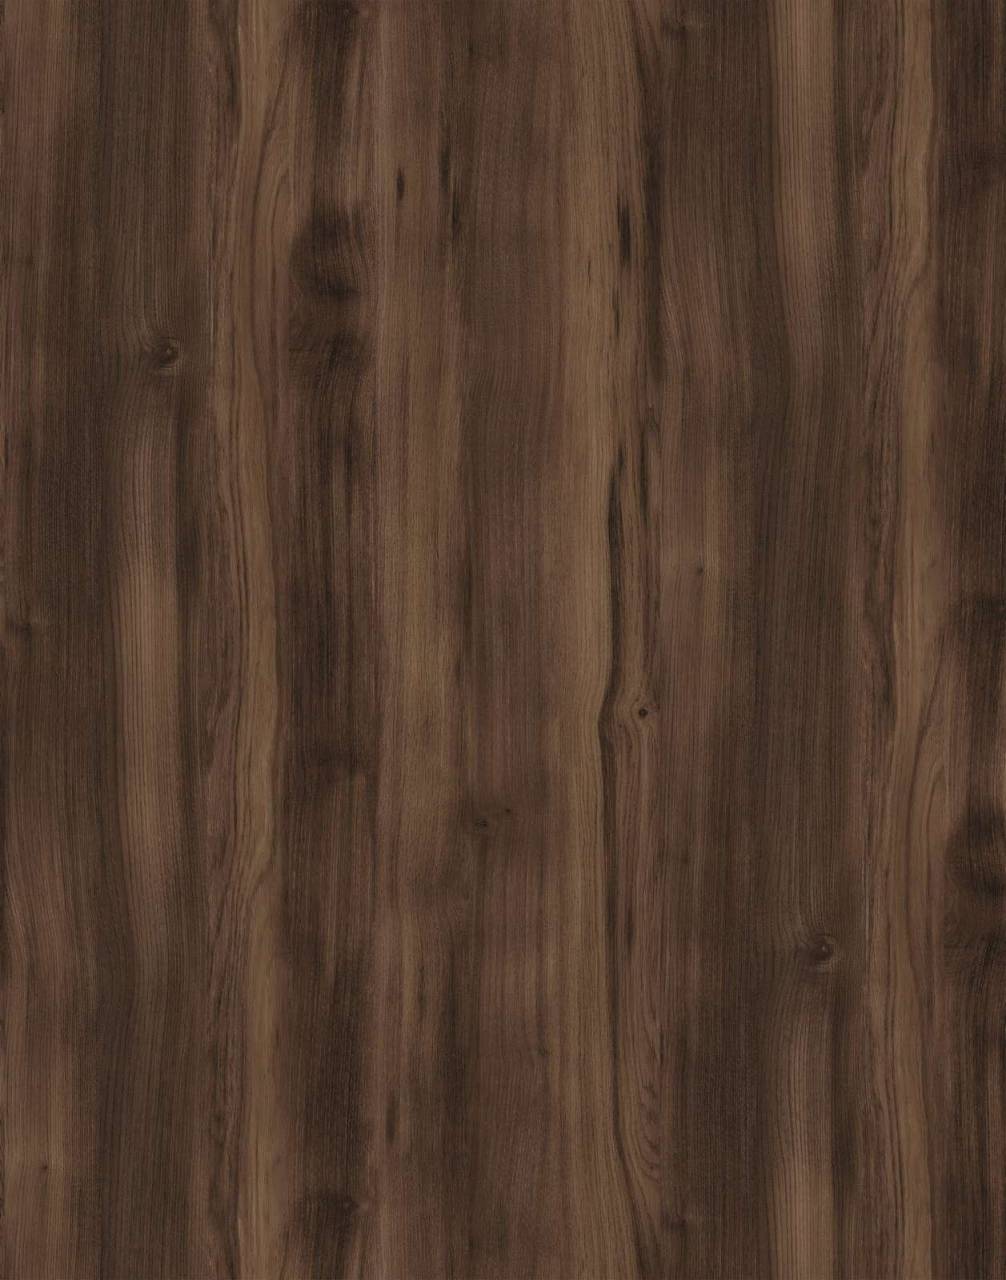 Close-up of K537 Ristretto Oak sample, featuring rich brown tones and pronounced wood grain patterns.